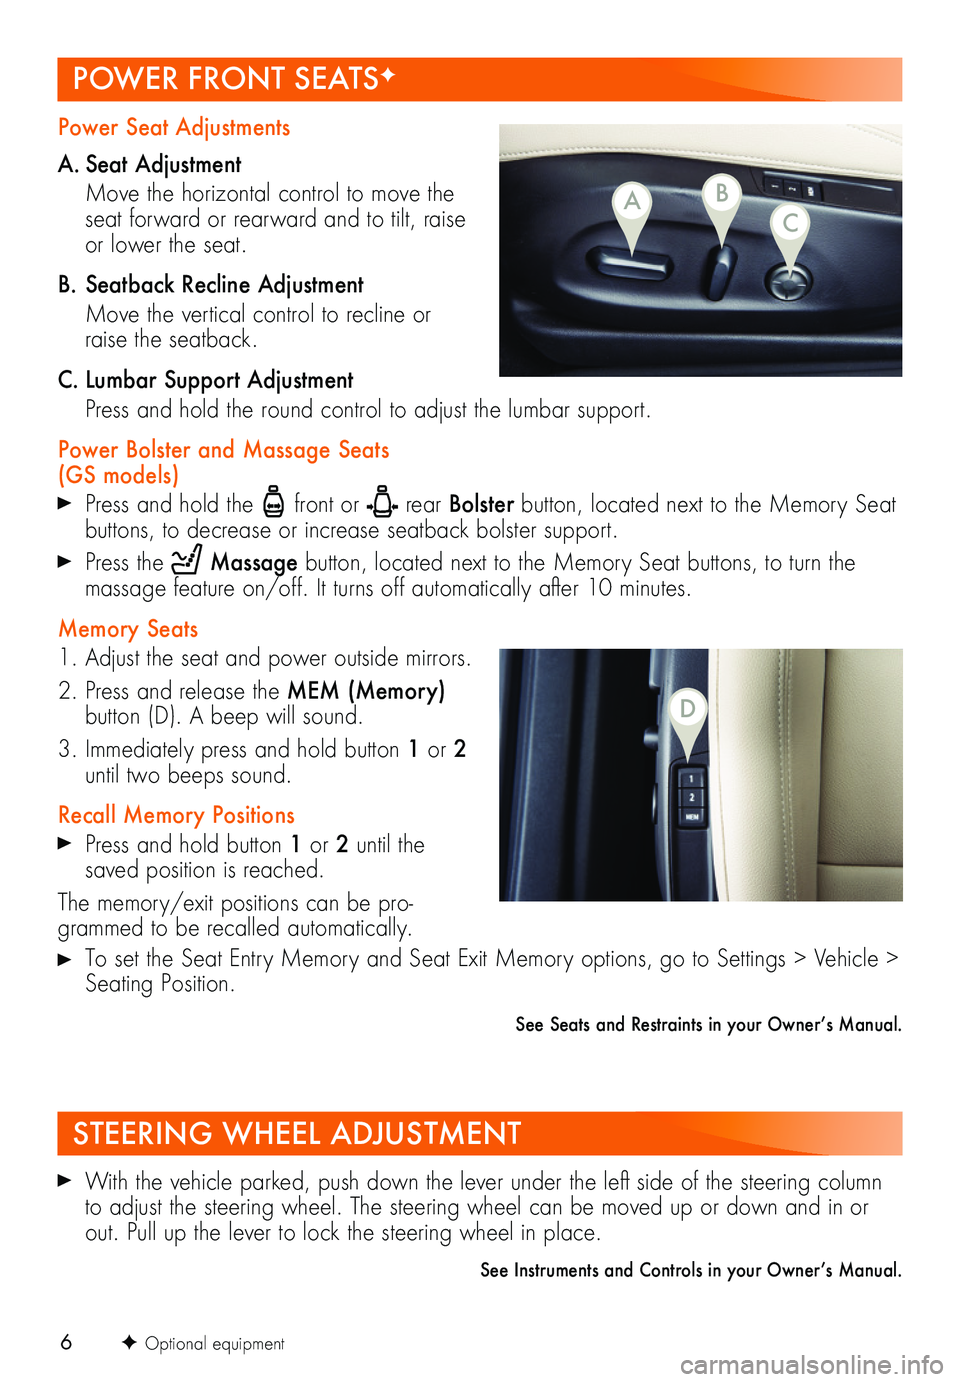 BUICK REGAL SPORTBACK 2019  Get To Know Guide 6
Power Seat Adjustments
A. Seat  Adjustment
 Move the horizontal control to move the seat forward or rearward and to tilt, raise or lower the seat.
B. Seatback Recline Adjustment
 Move the vertical c